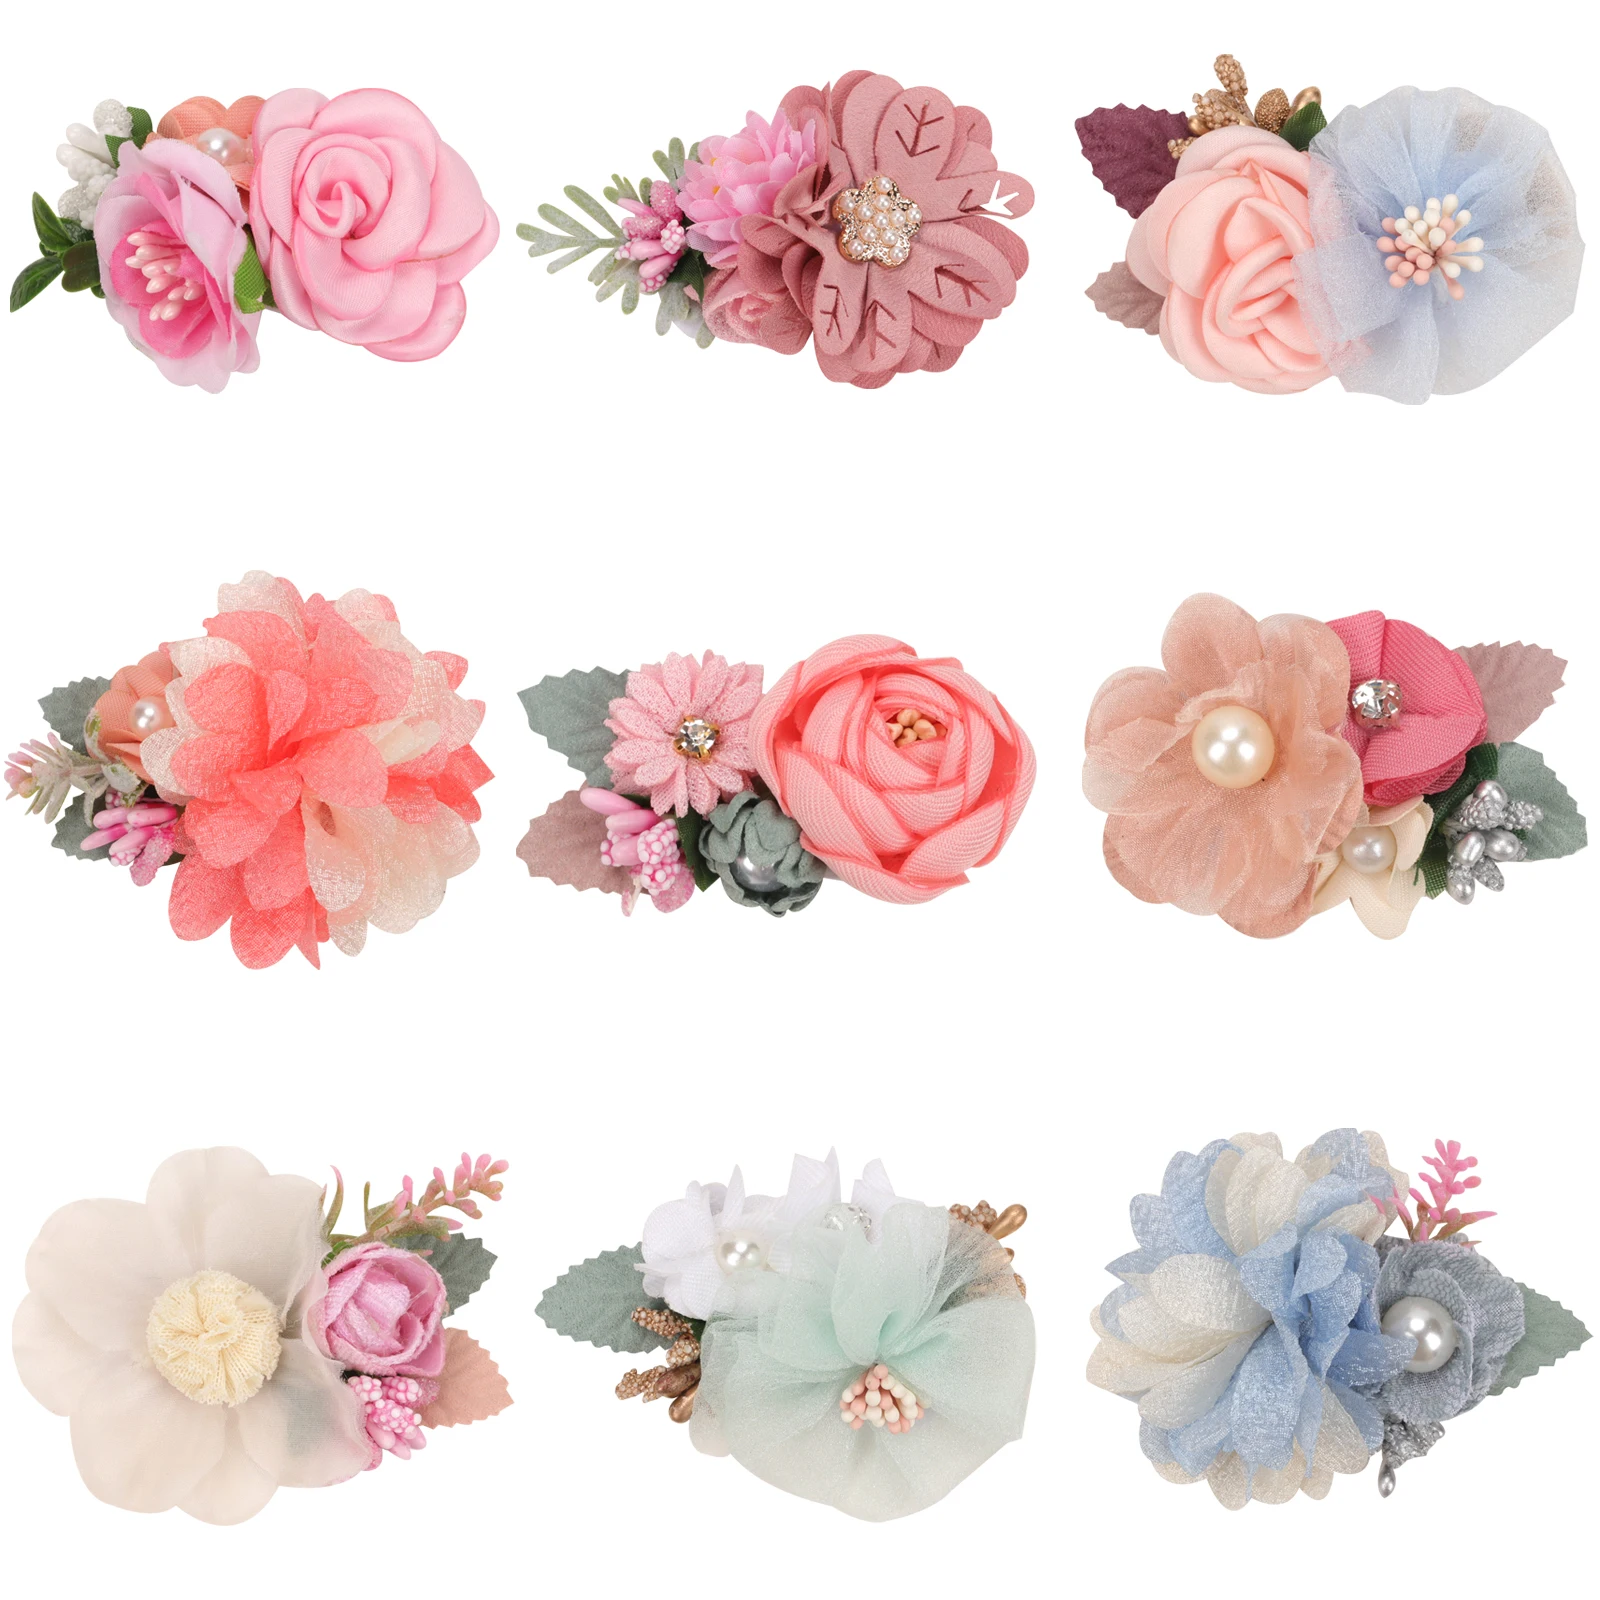 

Oaoleer Chiffon Flower Hair Clips Pins Kids Lace Flowers Hairpins Pins Barrettes For Girls Kids Lovely Hair Accessories Bouquet